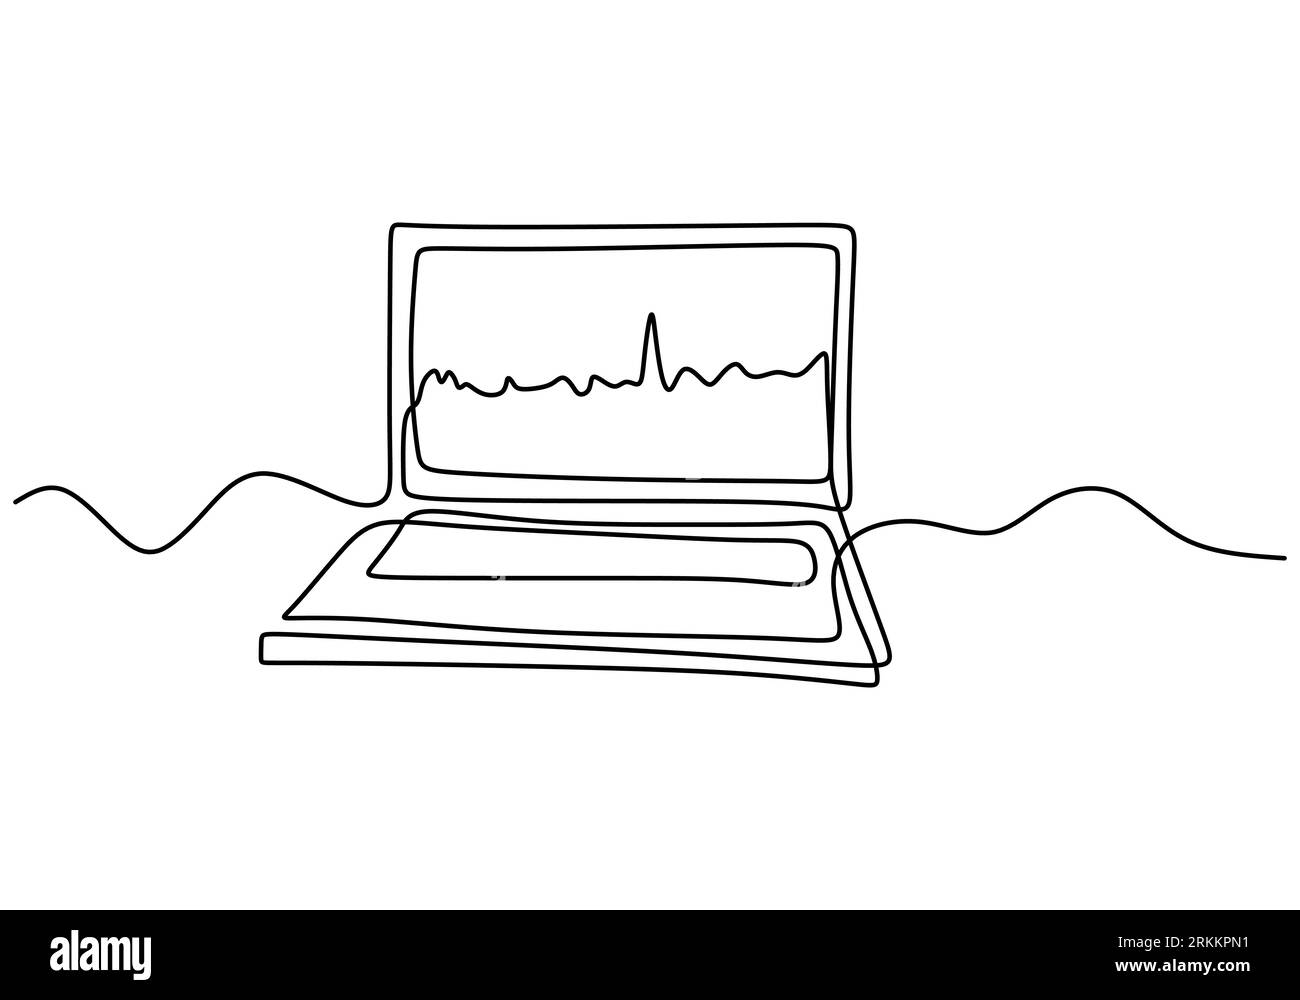 Graph growth indicators on laptop screen in one continuous line hand drawn art minimalism style. The concept is the growth of stock finance isolated o Stock Vector